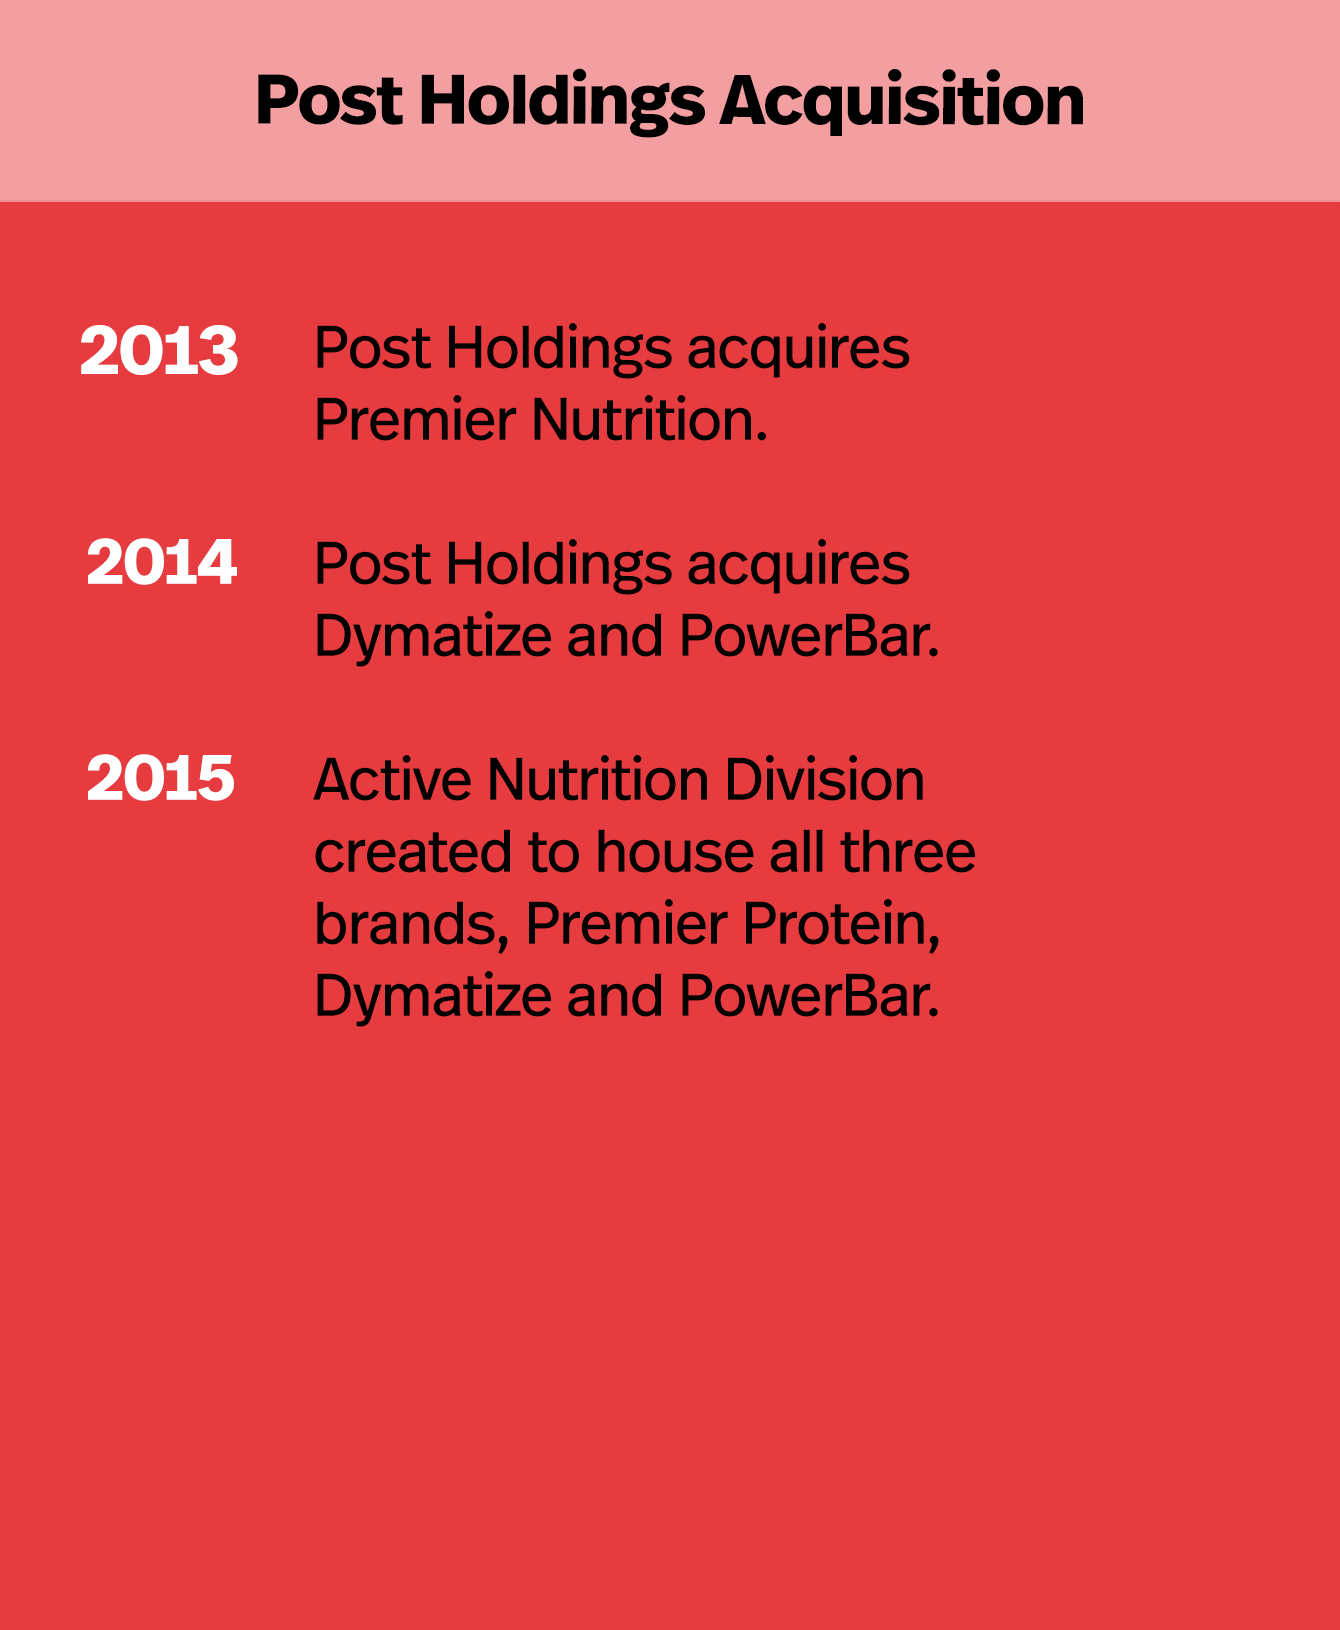 2013: Post Holdings acquires Premier Nutrition. 2014: Post Holdings acquires Dymatize and PowerBar. 2015: Active Nutrition Division created to house all three brands.